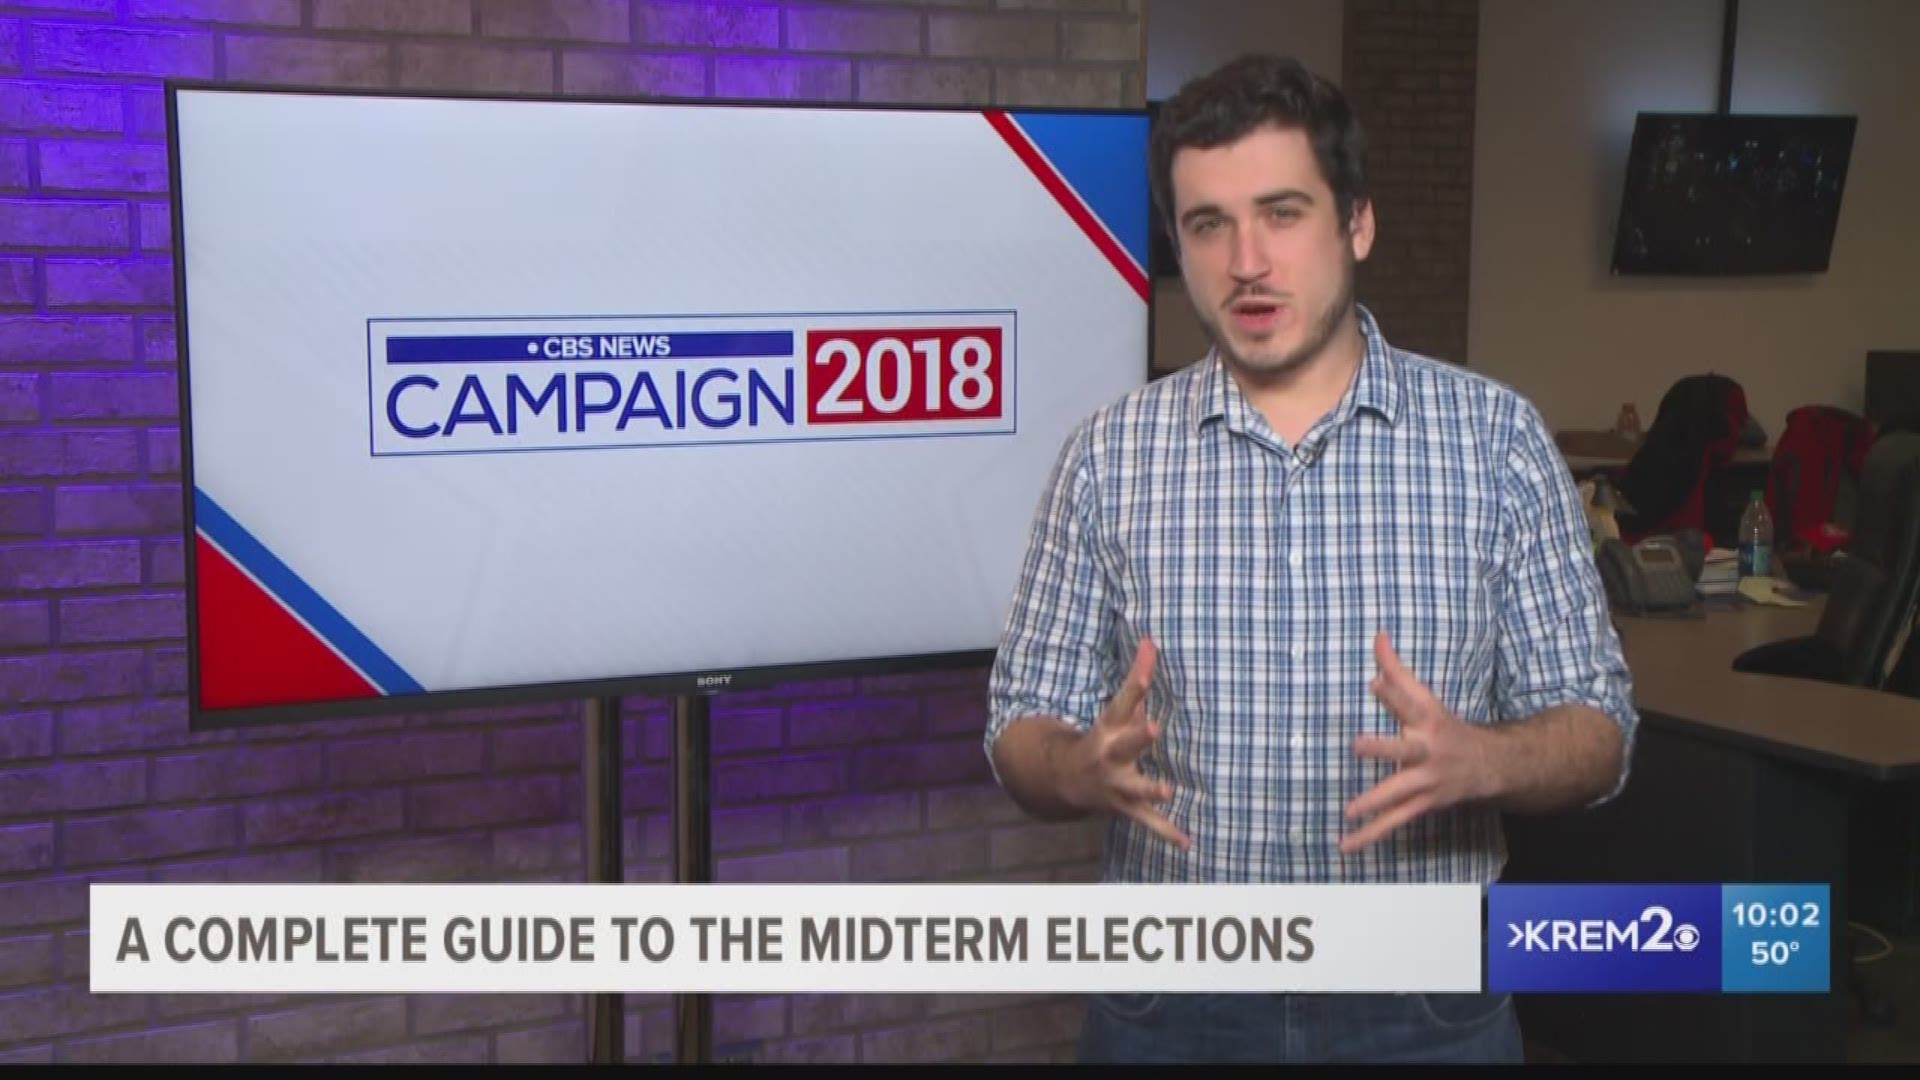 A complete guide to the midterm elections